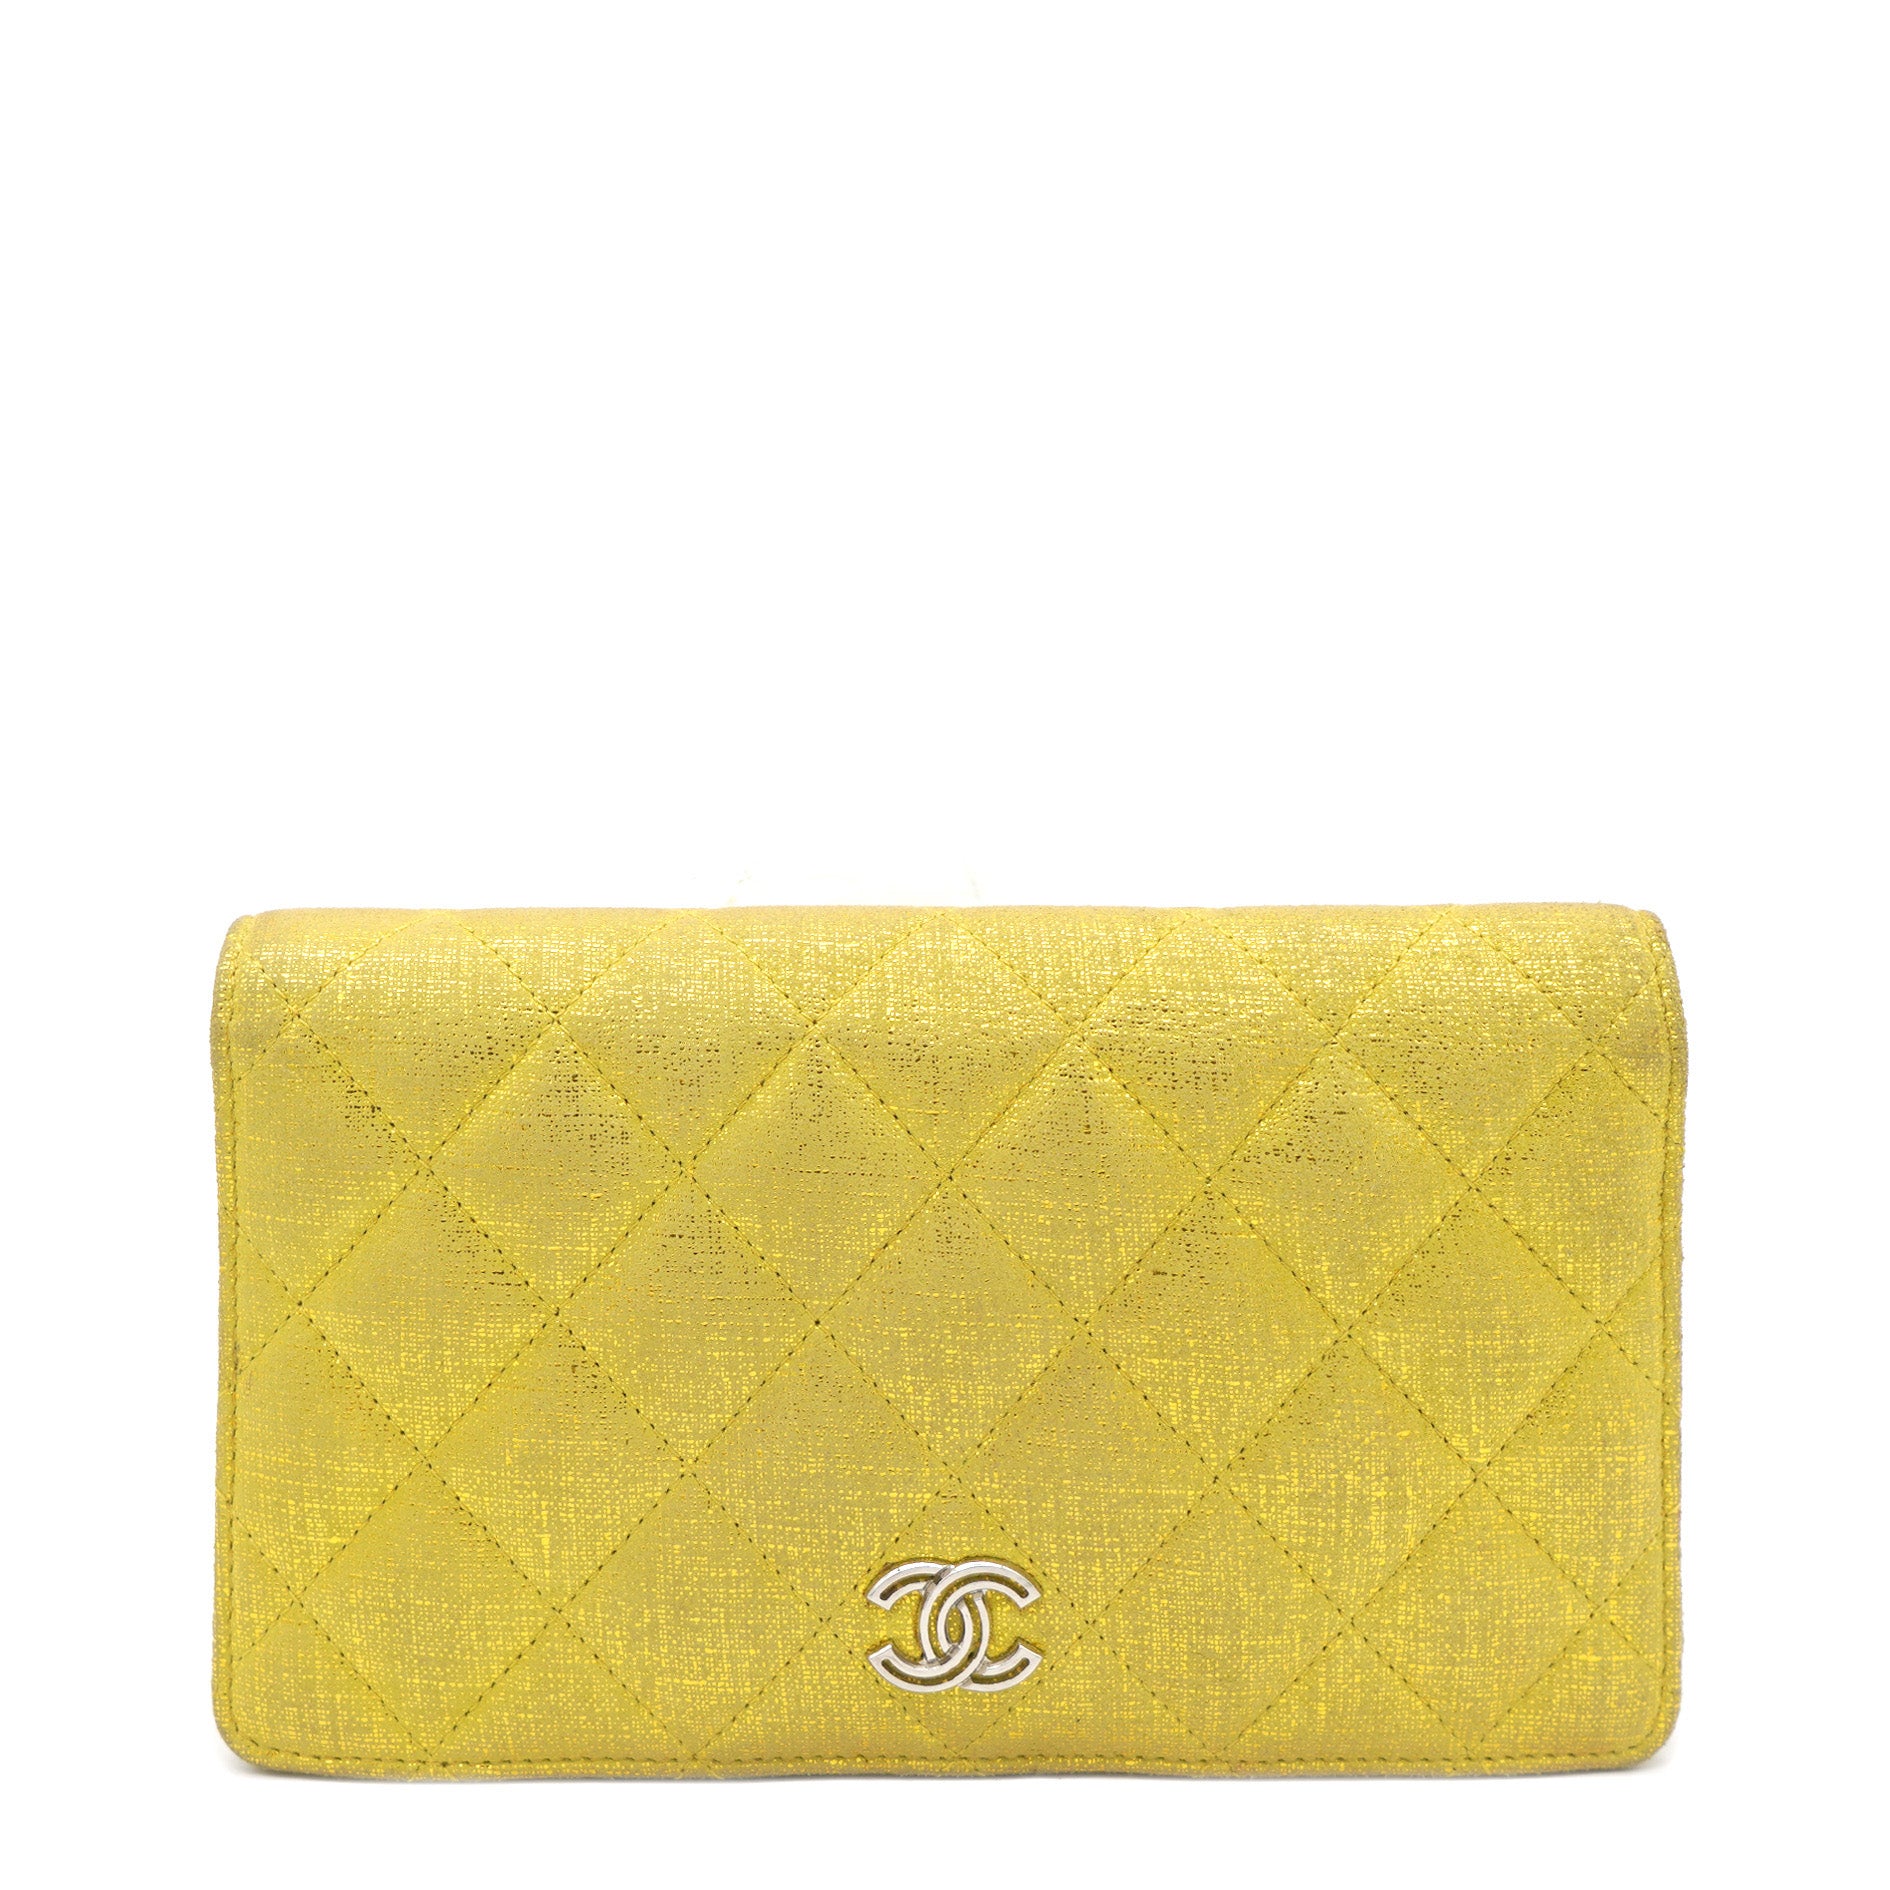 Chanel Lambskin Quilted Large Gusset Zip Around Wallet Pink – STYLISHTOP